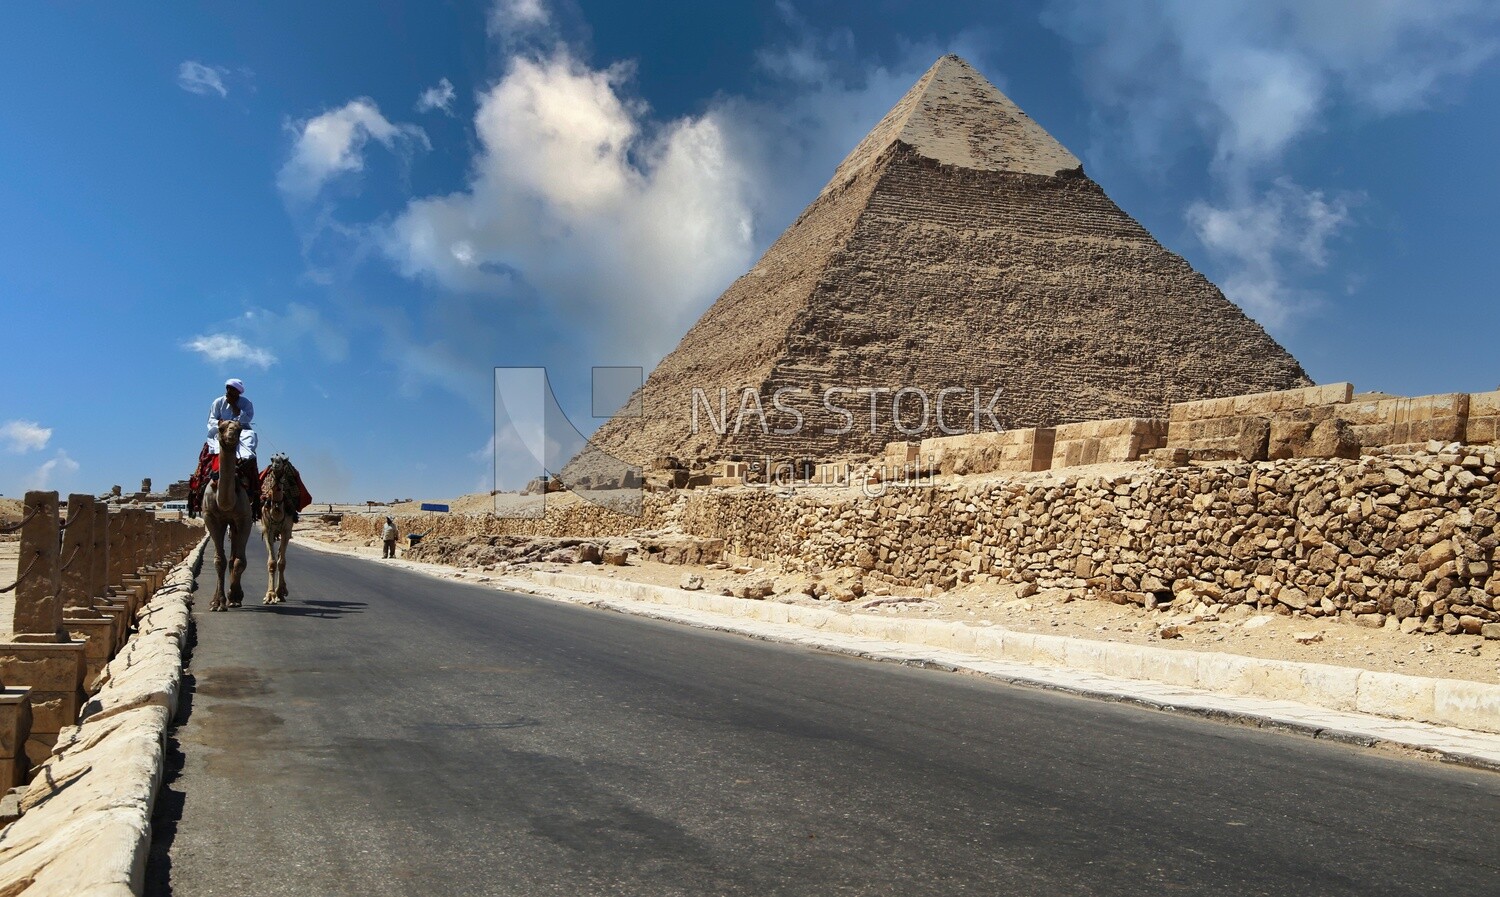 View of the Pyramid of Khafre in Giza, Tourism in Egypt, famous landmarks in Egypt